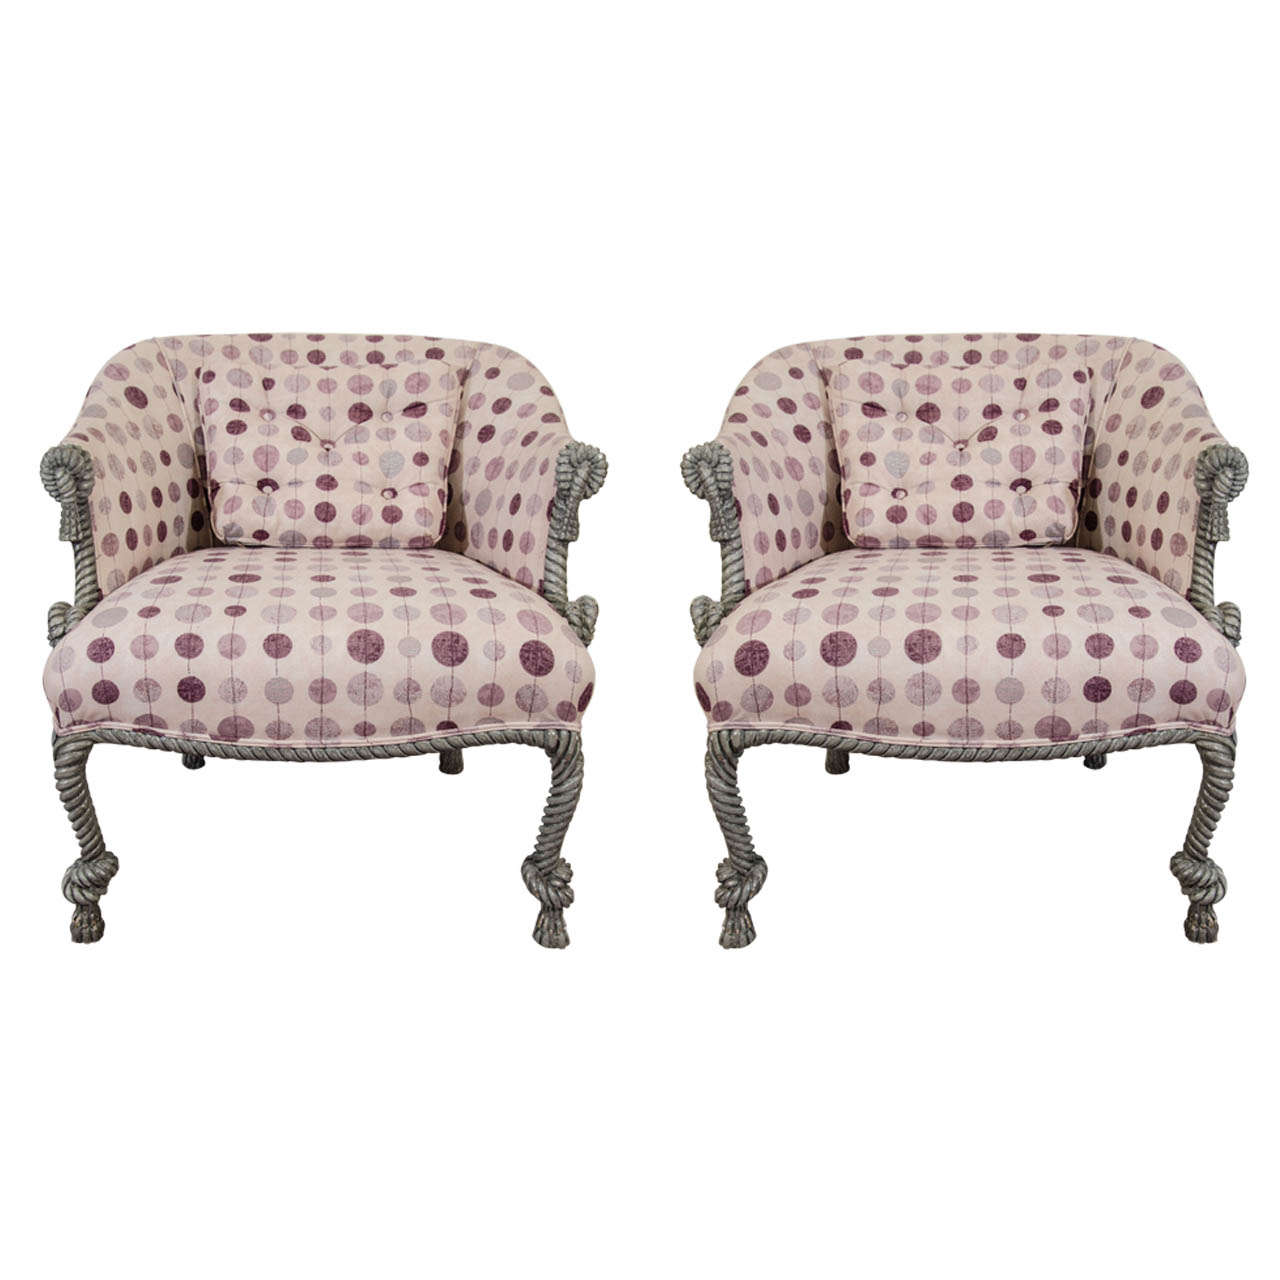 A Pair of Italian Upholstered Armchairs with Tassel Motif Frame